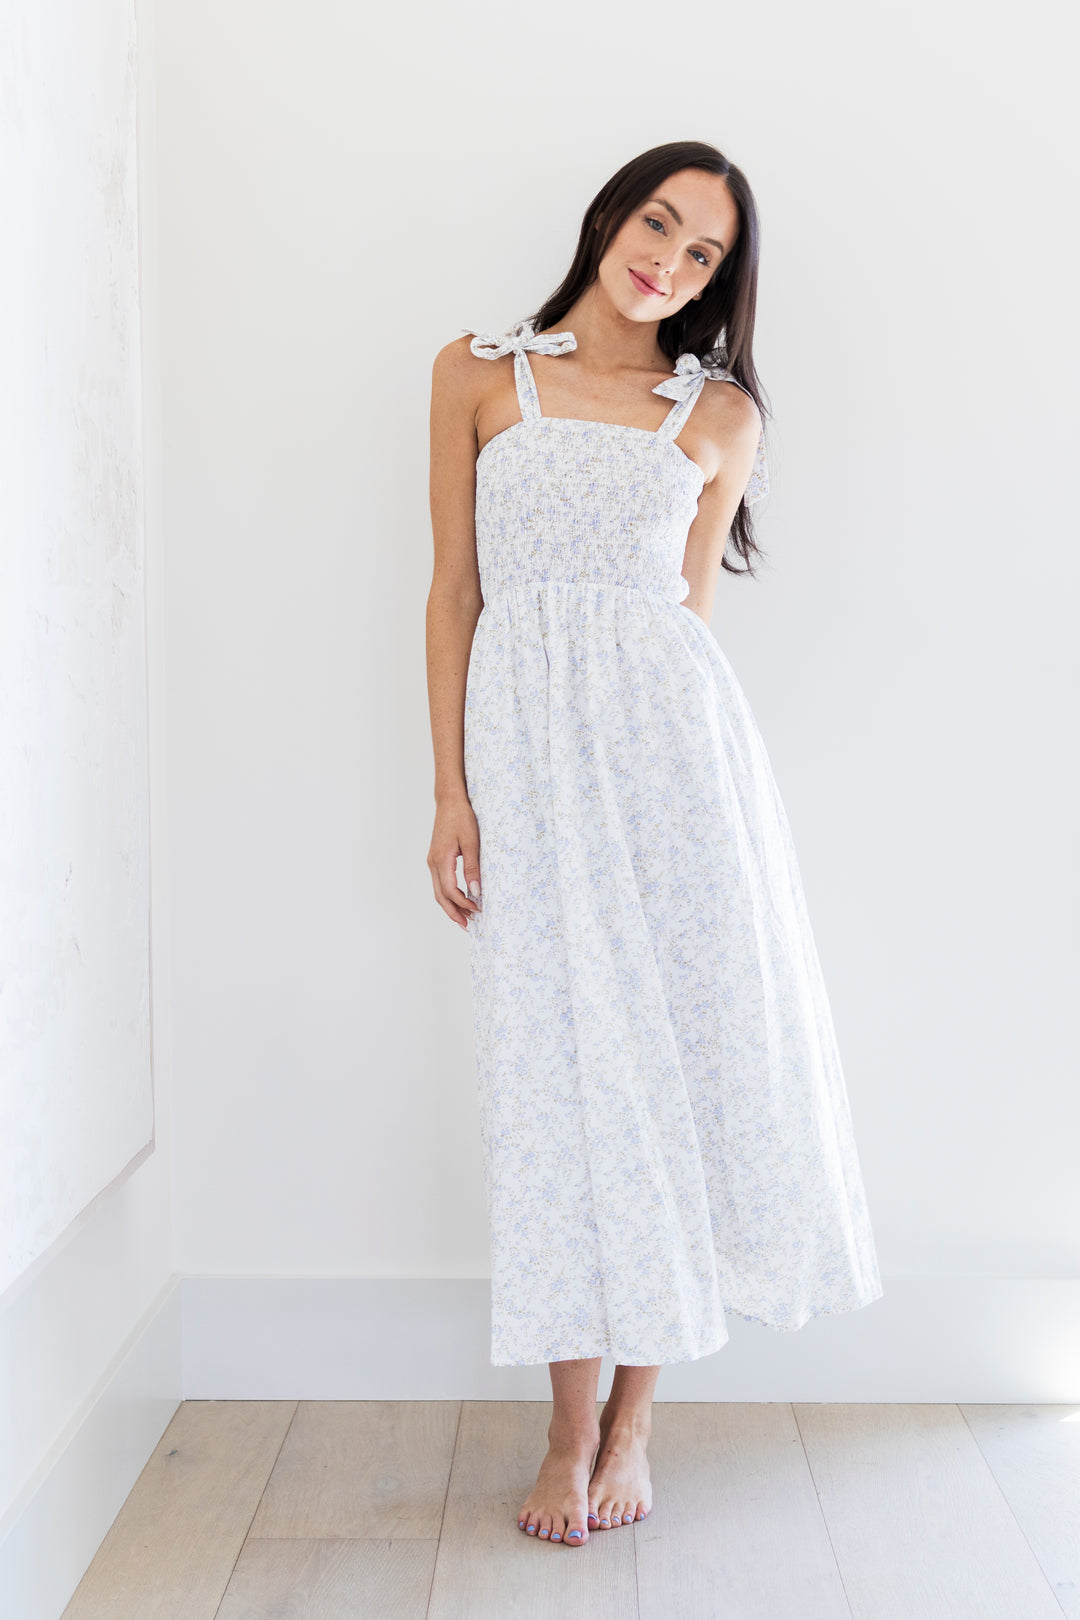 Laina Maxi Dress in Pacific